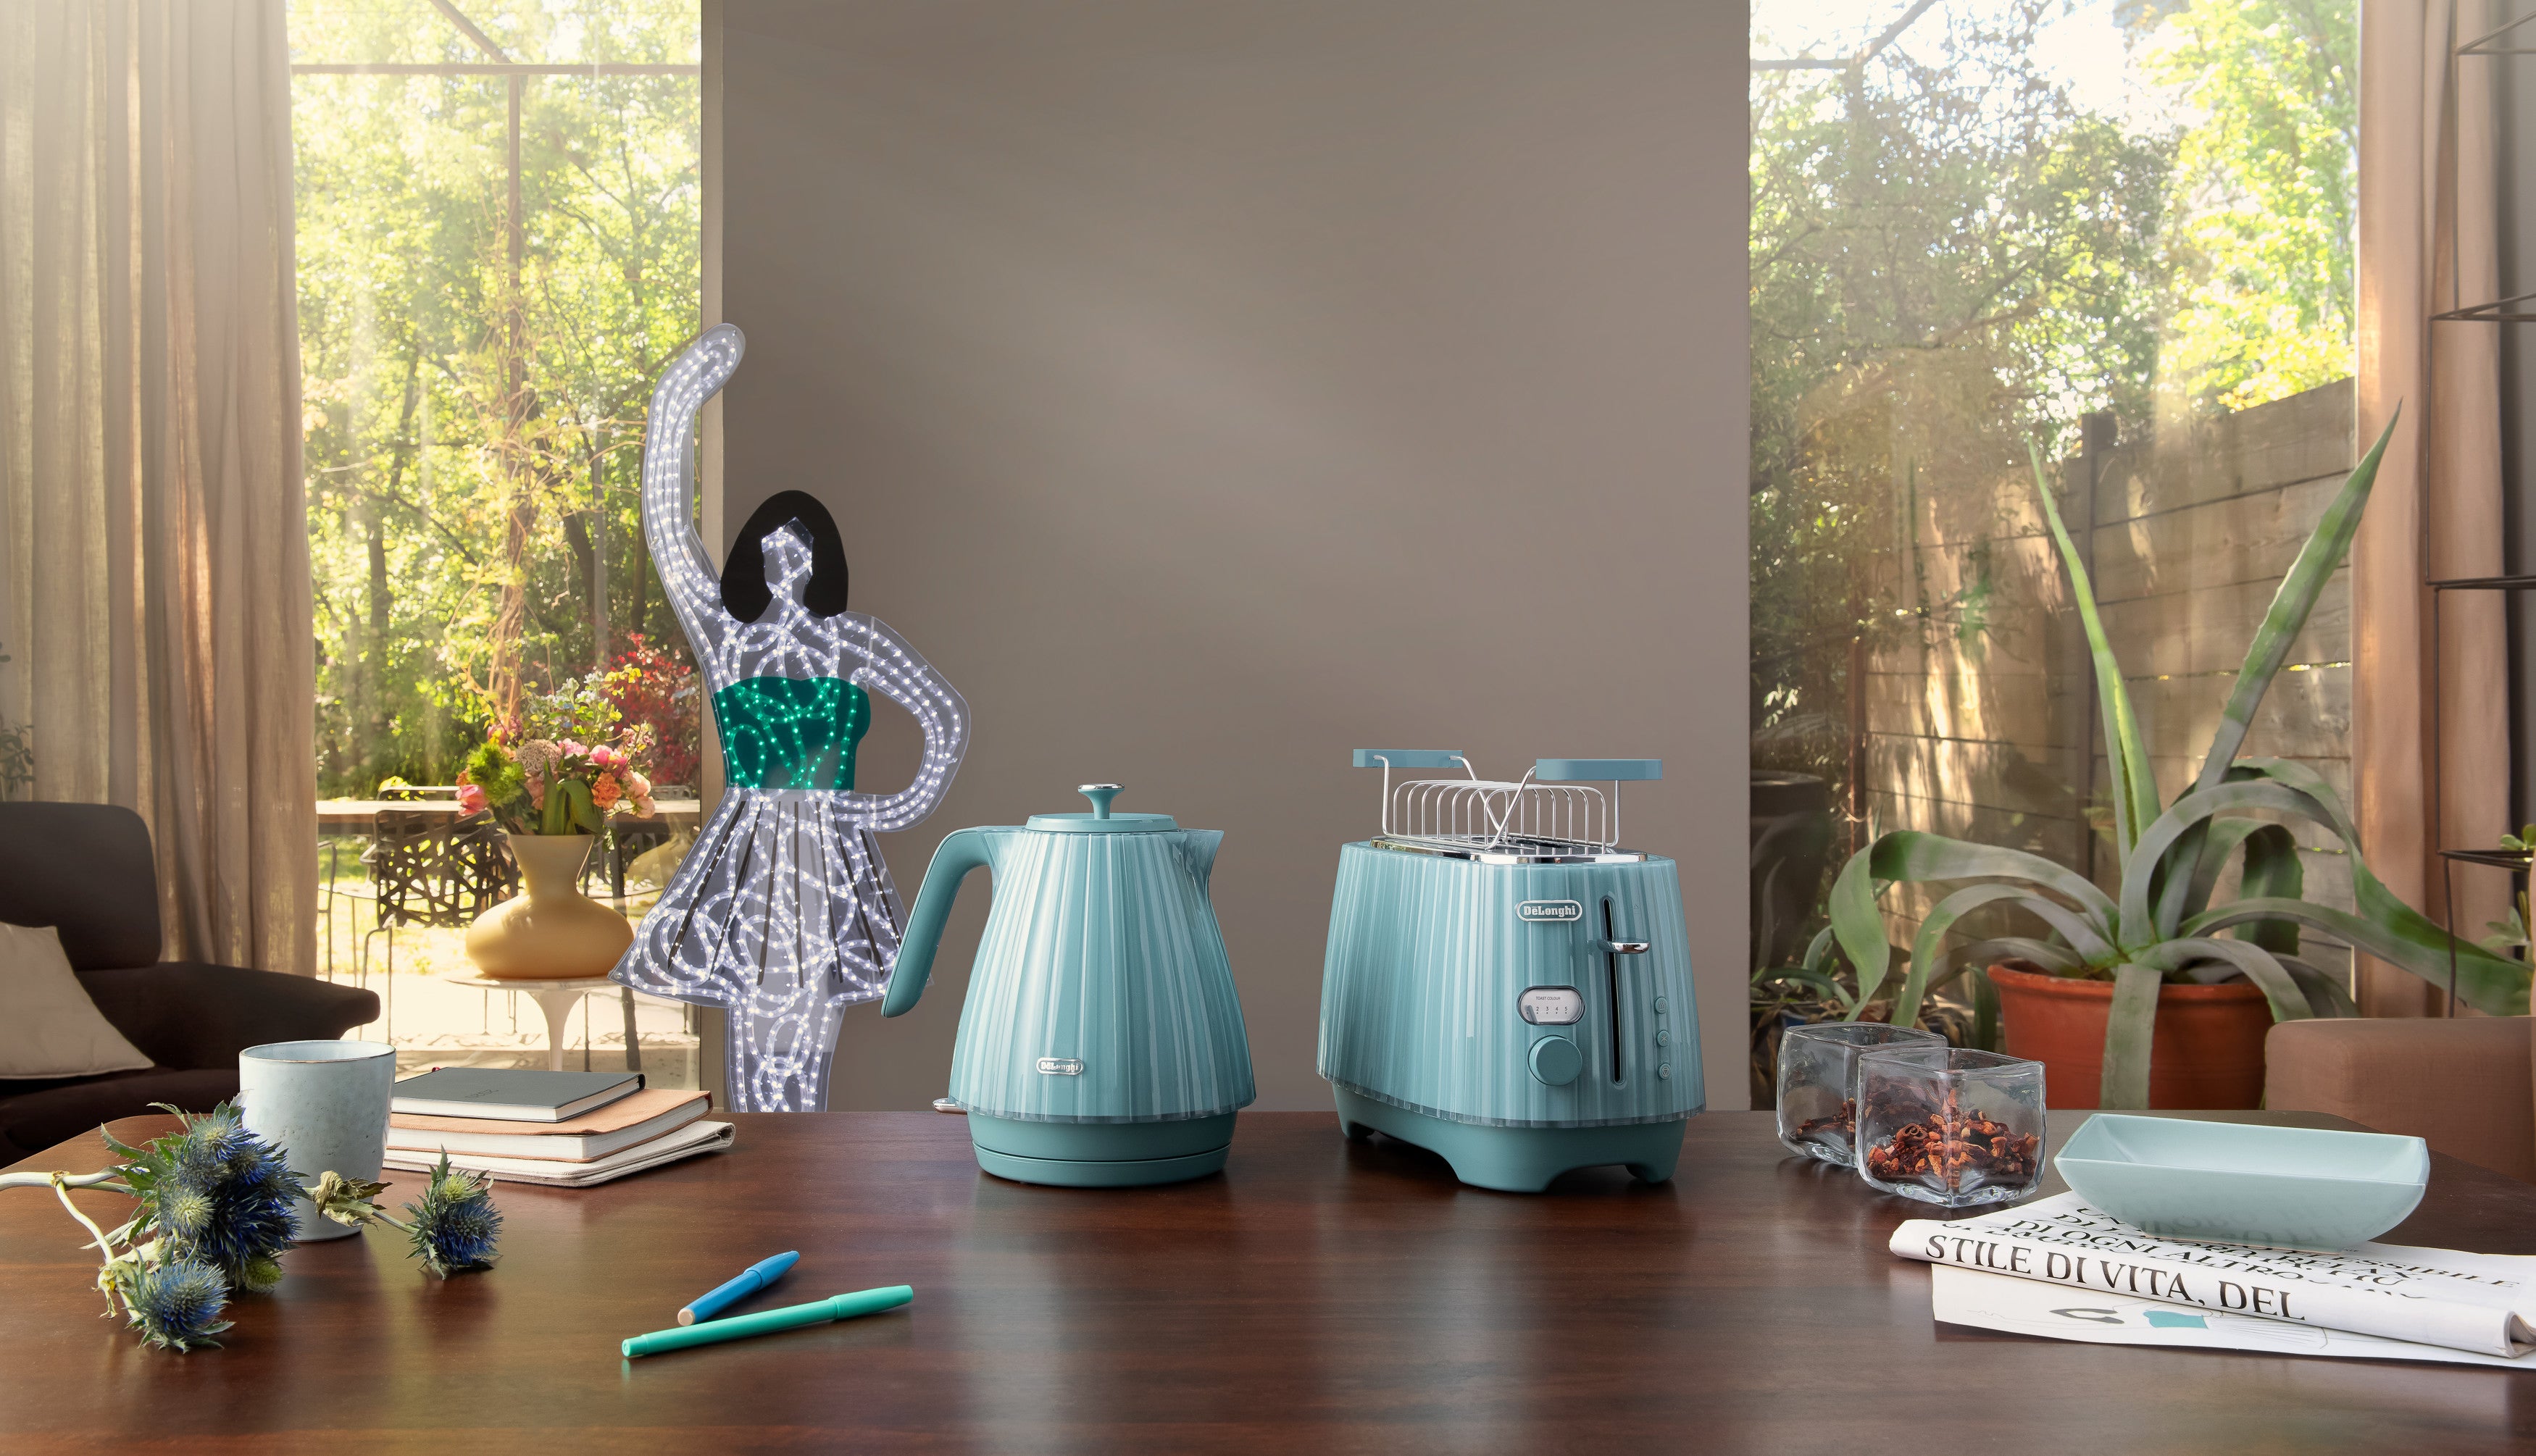 Ogundehin has partnered with appliance manufacturer De’Longhi to launch its Ballerina collection of delicately fluted kettles and toasters